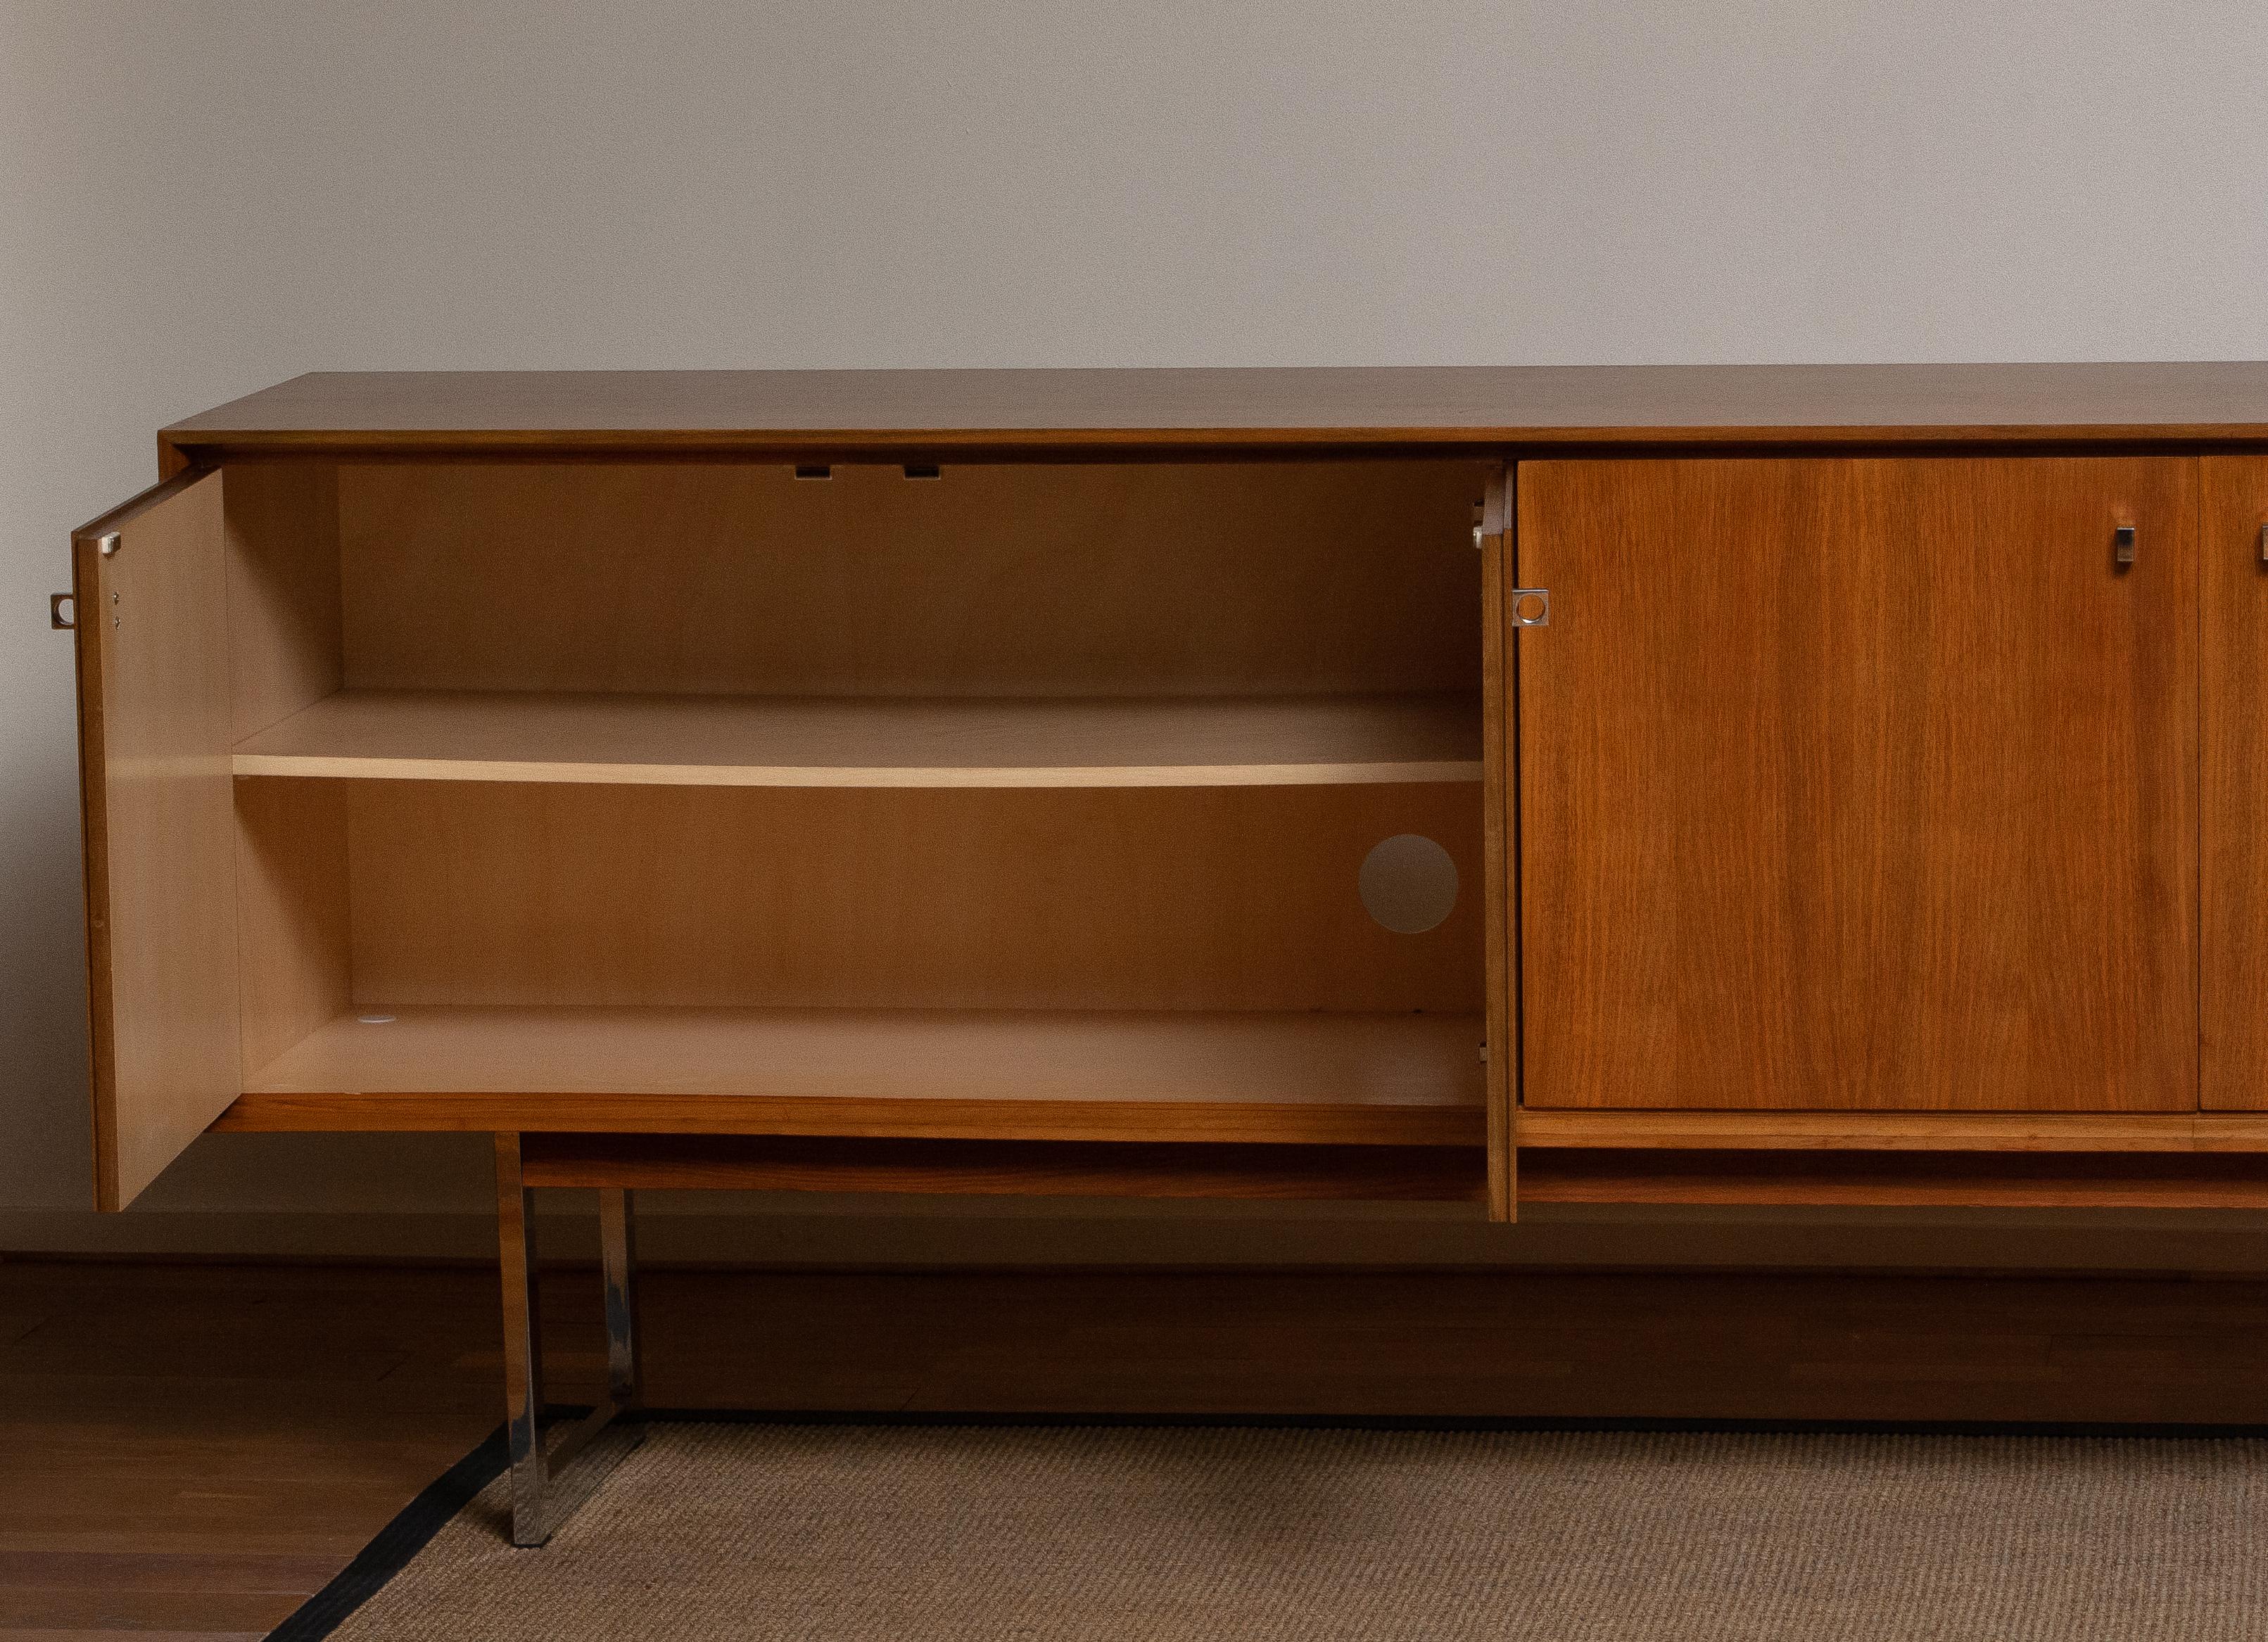 Mid-Century Modern 1970, Wide Credenzas Sideboard in Walnut with Chrome Handles and Legs